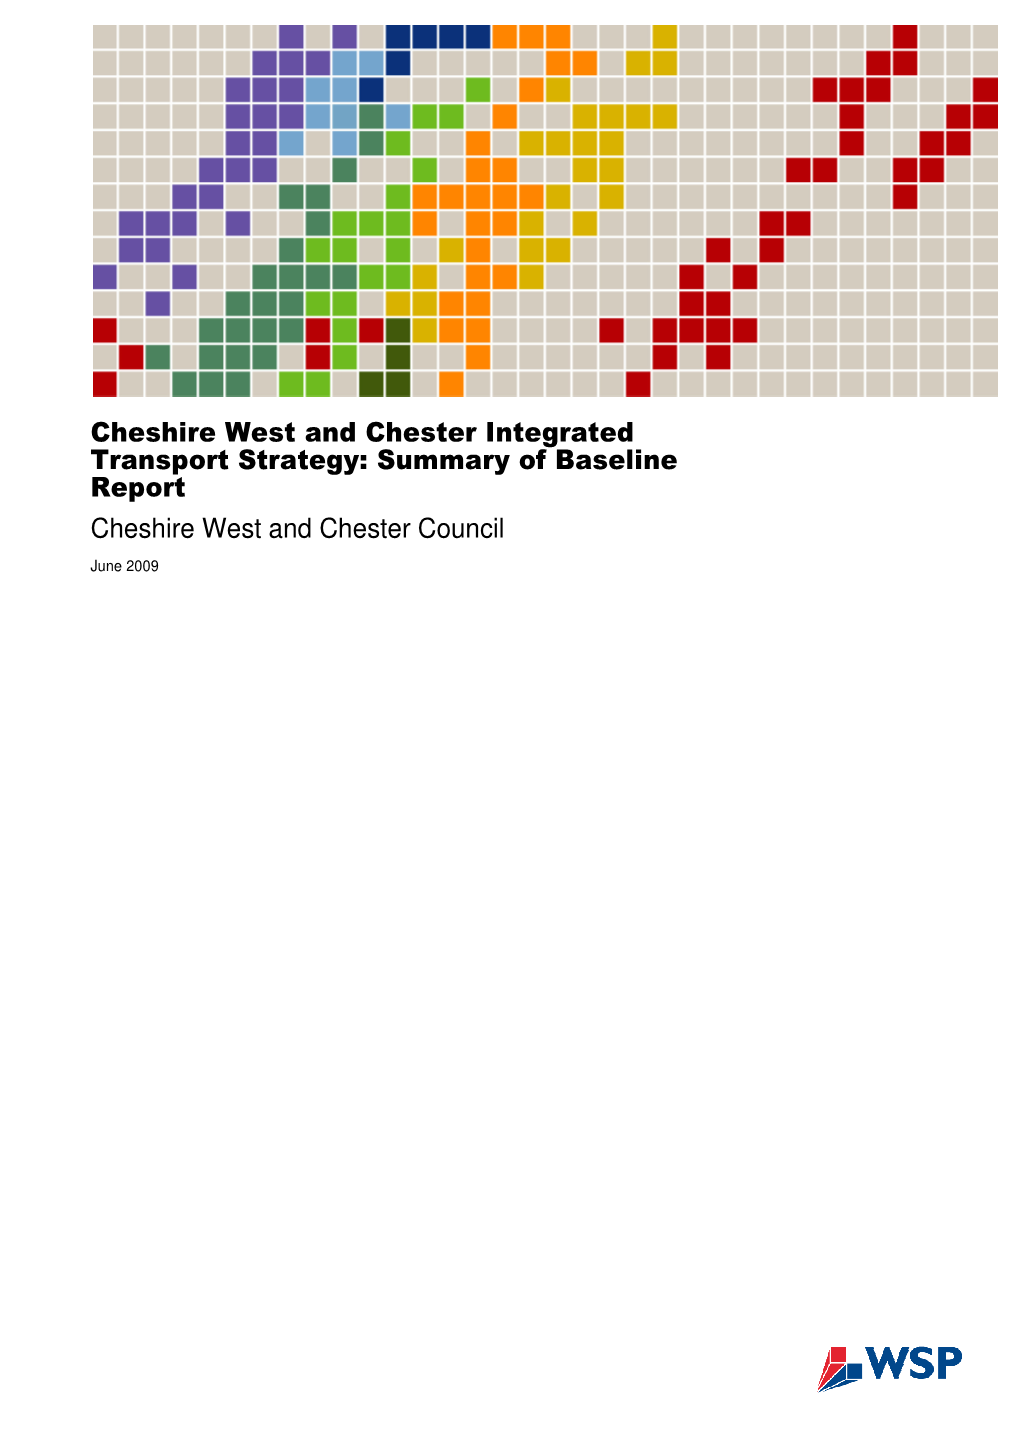 Integrated Transport Strategy: Sum M Ary Ofbaseline Report Cheshire West and Chester Council June 2009 QM